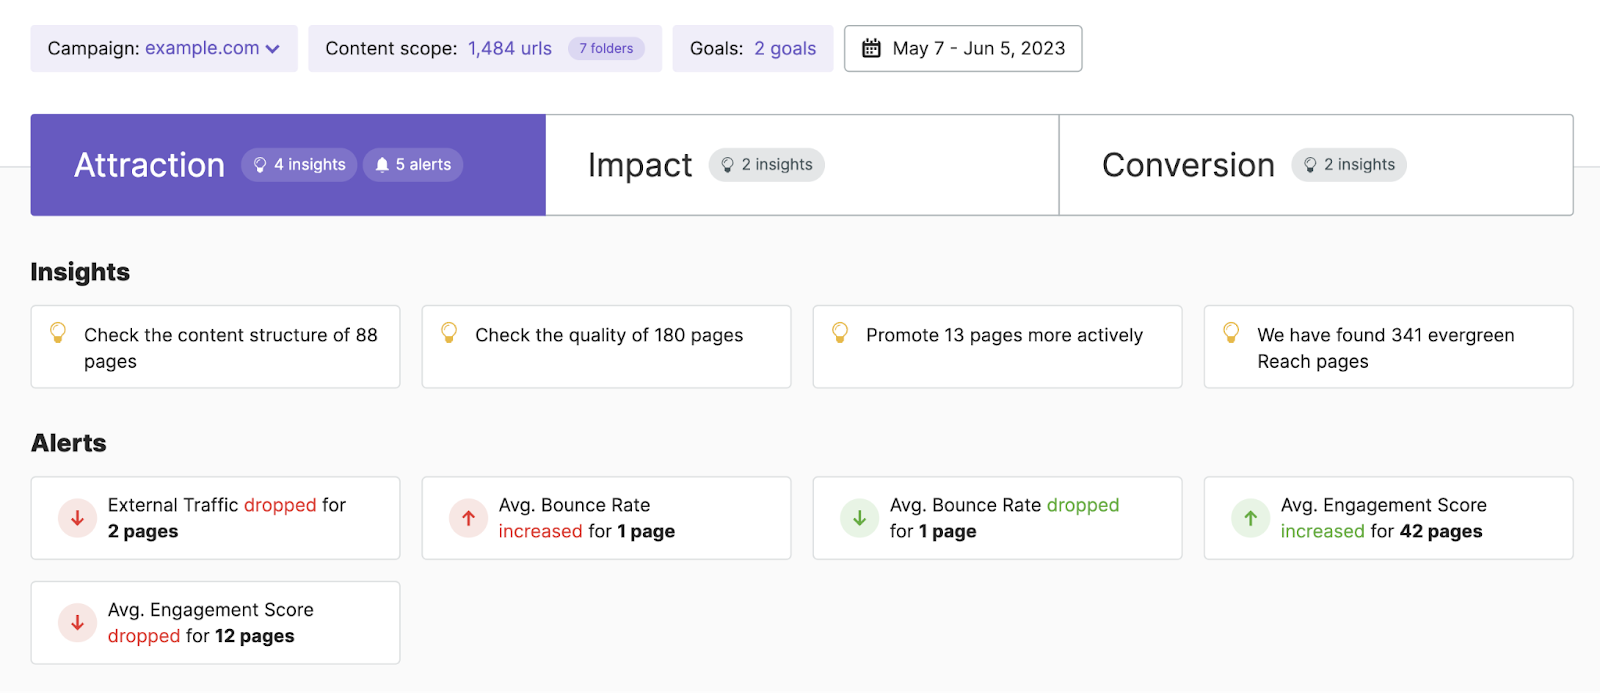 Semrush’s ImpactHero tool helps you highlight underperforming and high-performing content